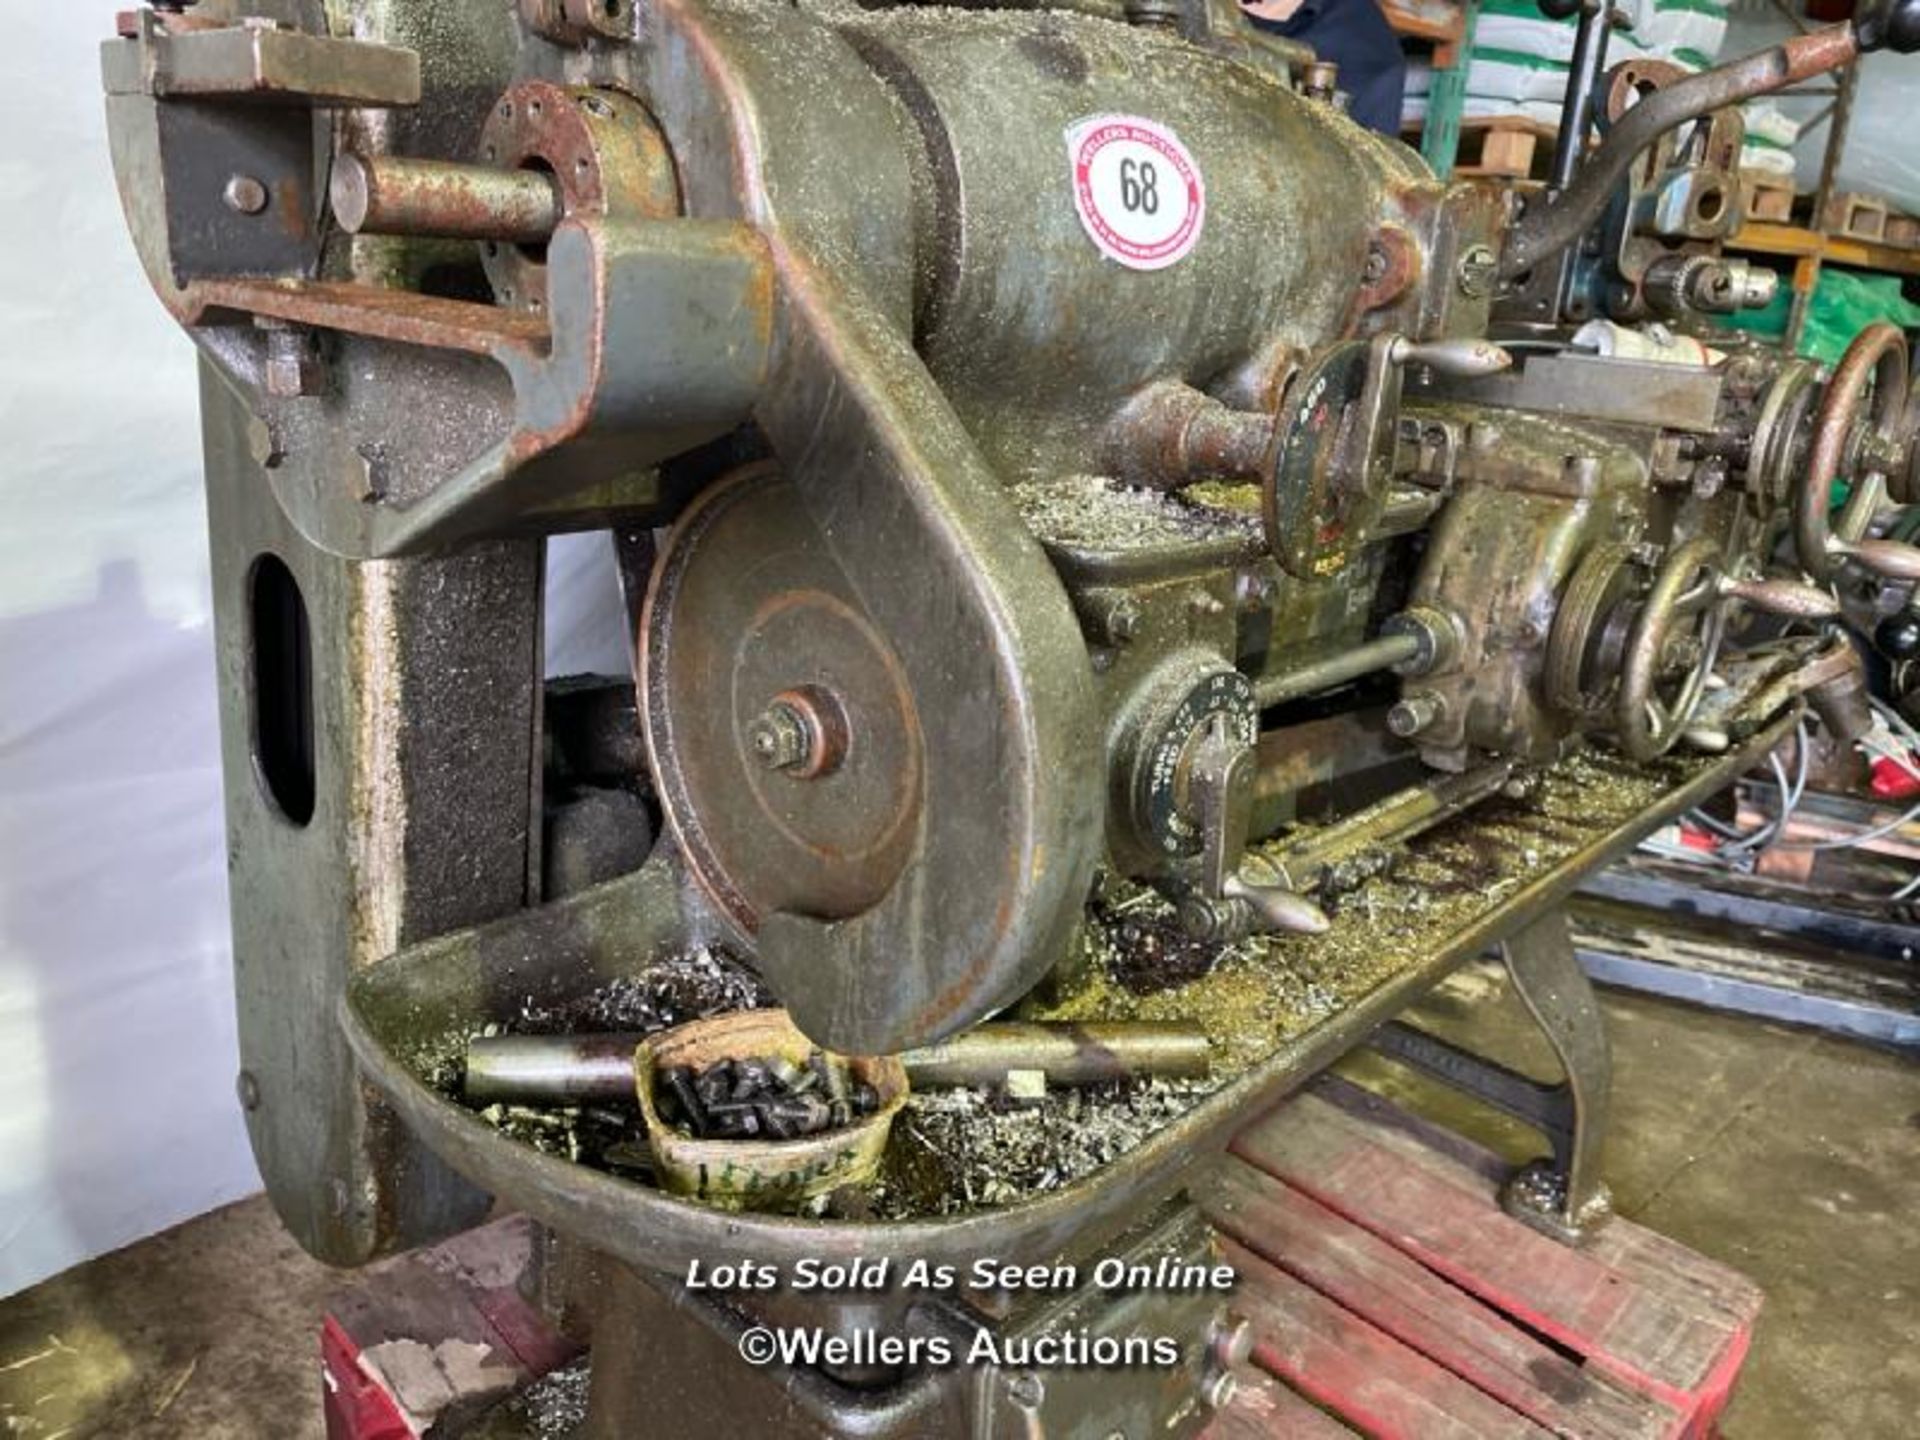 H. W. WARD AND SON CAPSTAN 2A LATHE, 3 PHASE, INCL. 3 JAW CHUCK, IN WORKING ORDER - Image 3 of 9